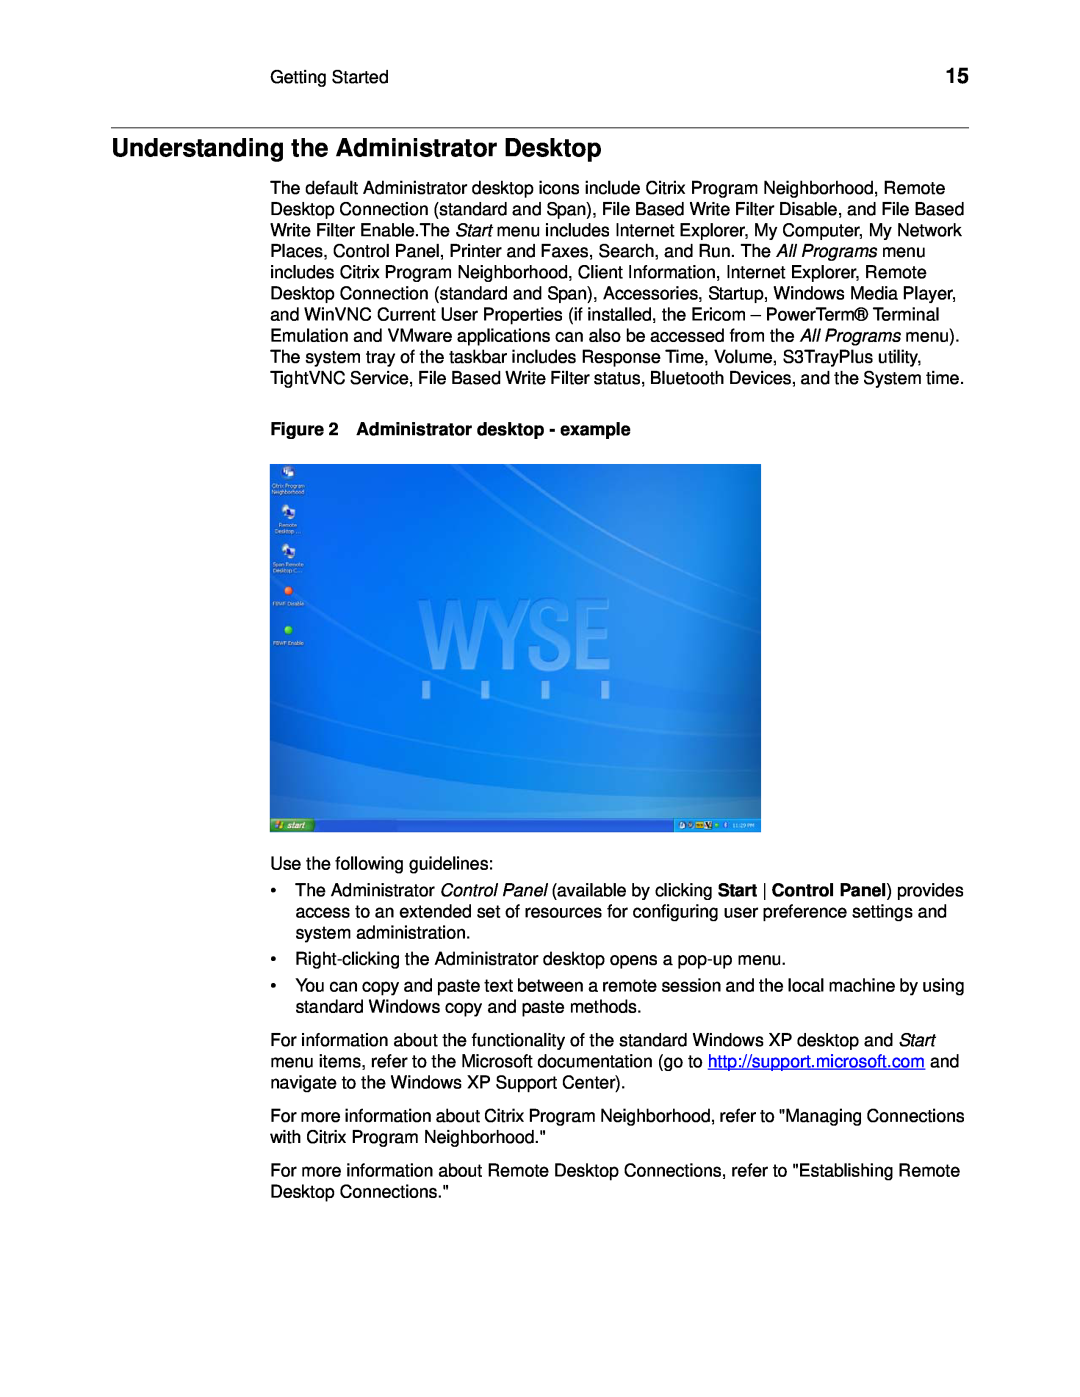 Wyse Technology C90LE, R90L manual Understanding the Administrator Desktop, Administrator desktop - example 